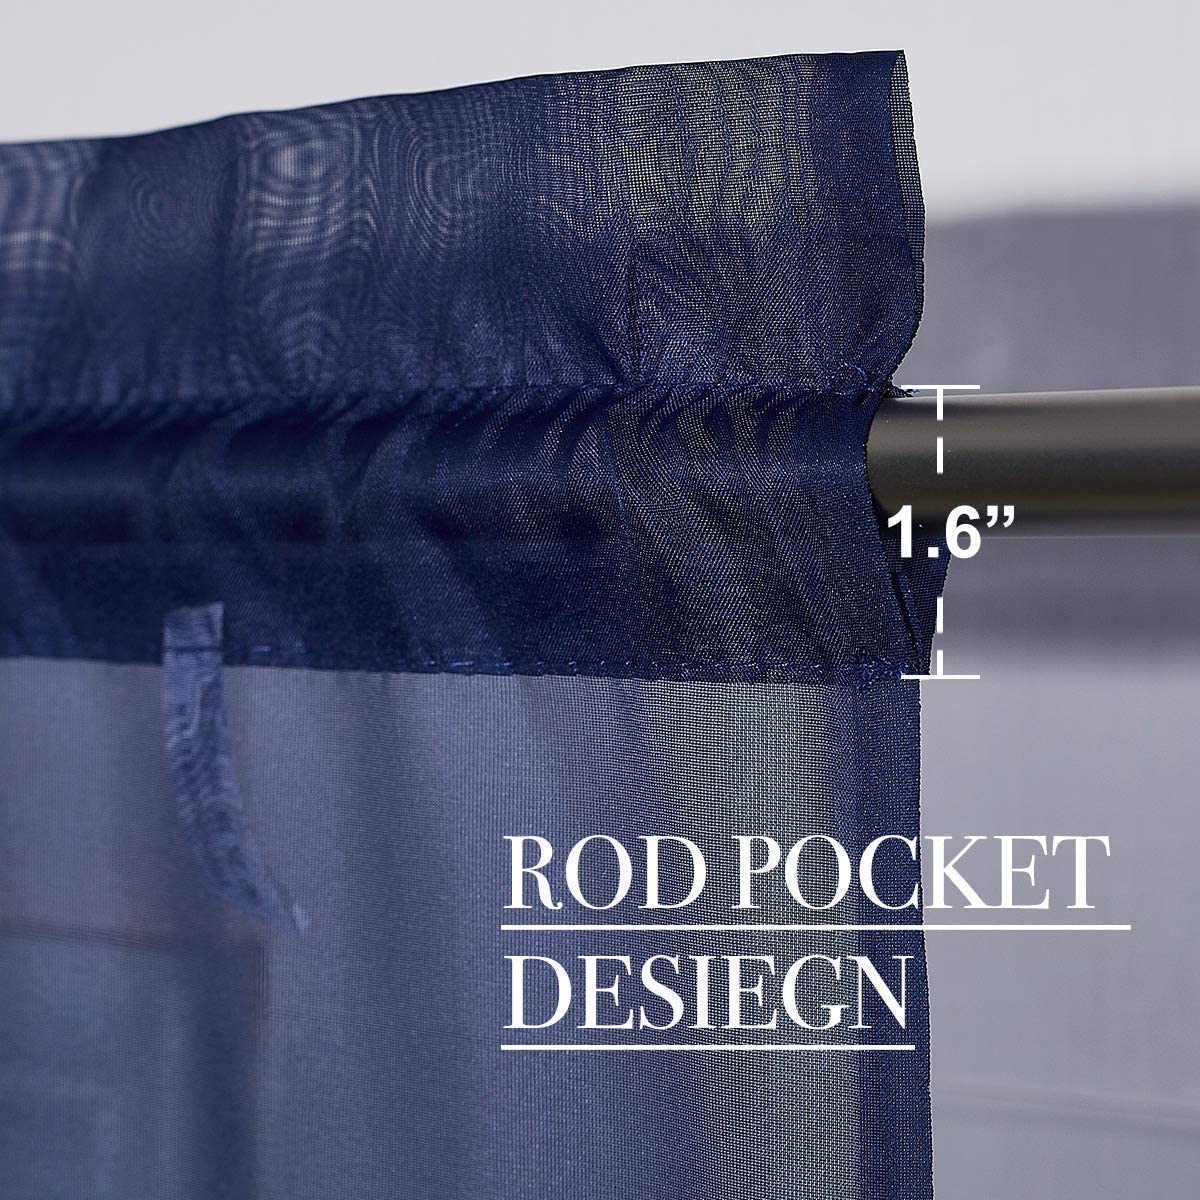 Rod Pocket Sheer Privacy Voile Curtains For Bedroom And Living Room 2 Panels KGORGE Store